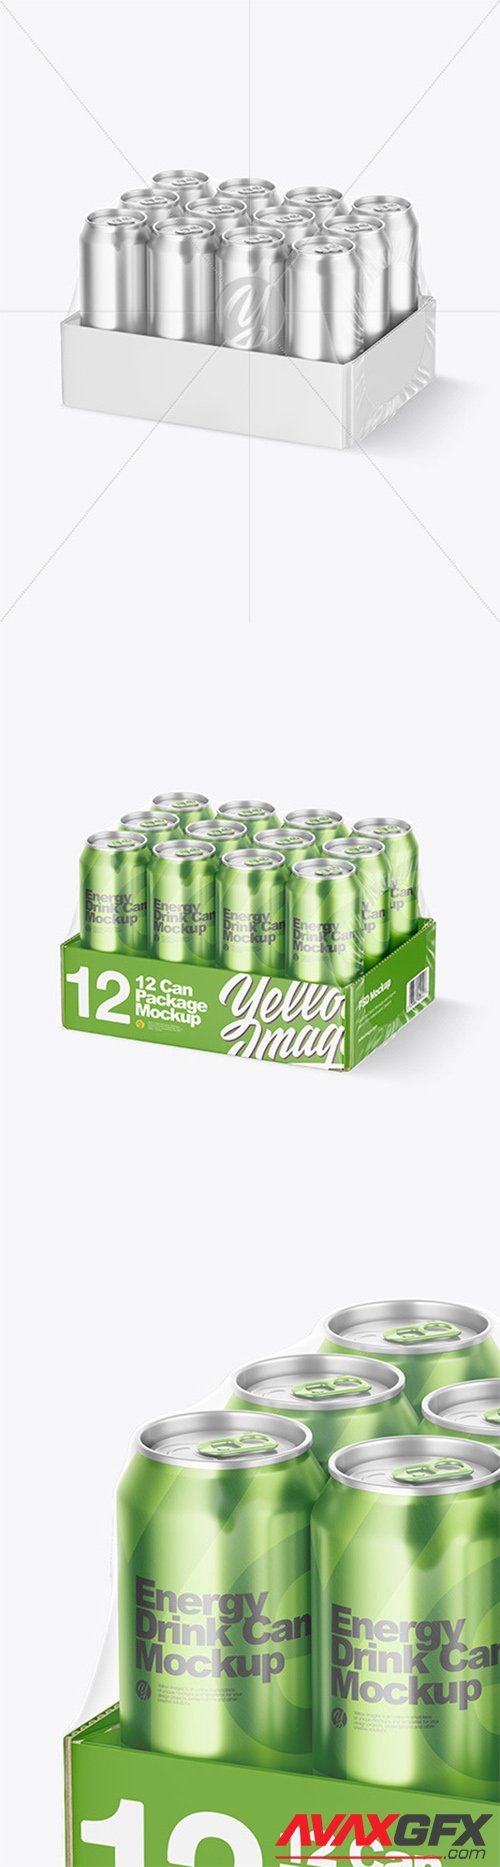 Transparent Pack with 12 Metallic Cans Mockup 63755